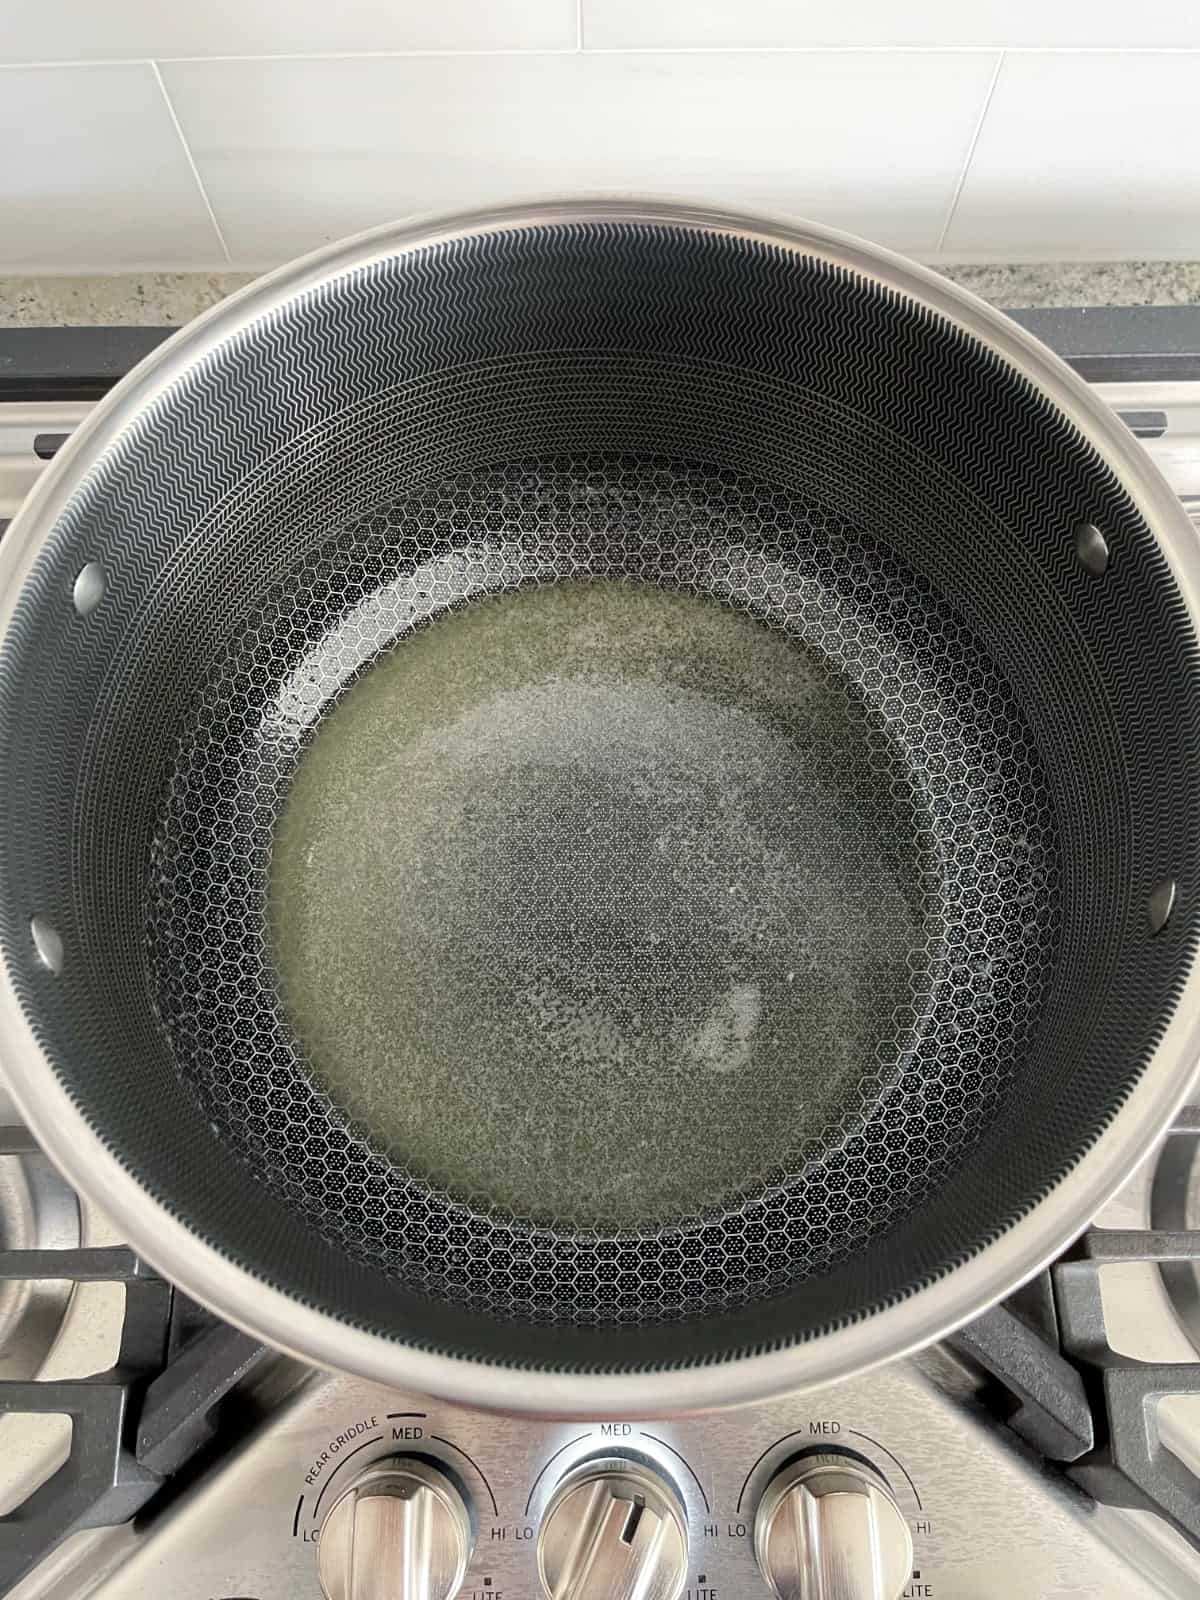 Melted butter in large saucepan on stovetop.